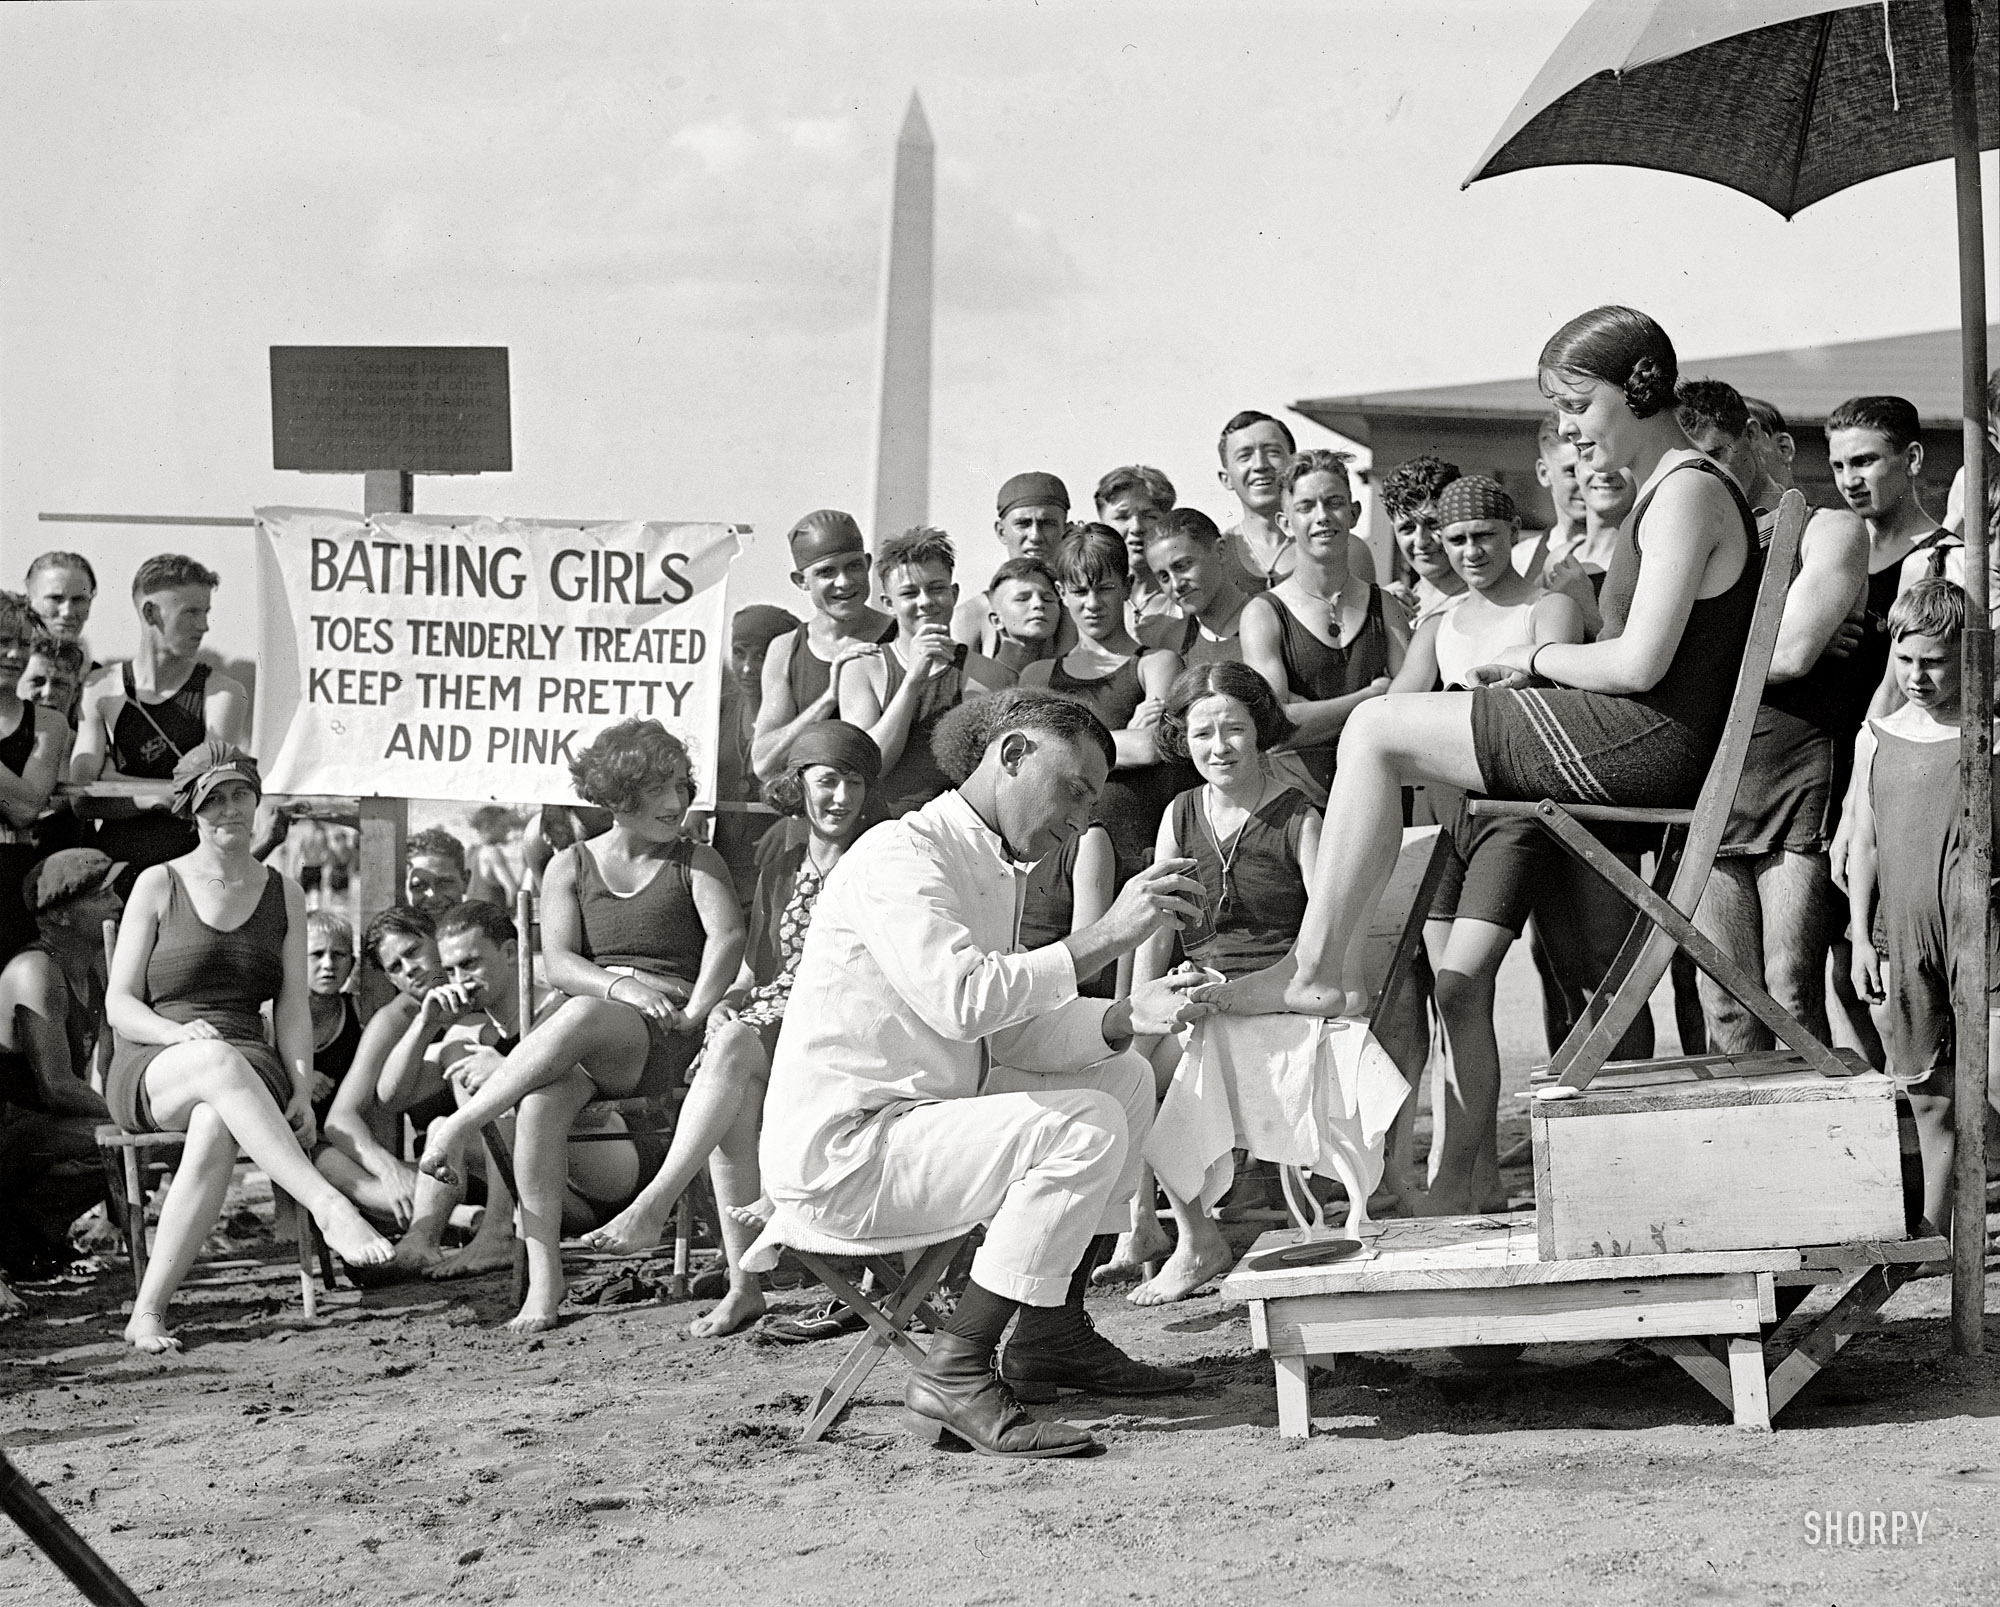 August 16, 1922. Washington, D.C. "Toe Doctor." Once your tootsies are taken care of, please note that "malicious splashing" is strictly prohibited. National Photo Company Collection glass negative. View full size.